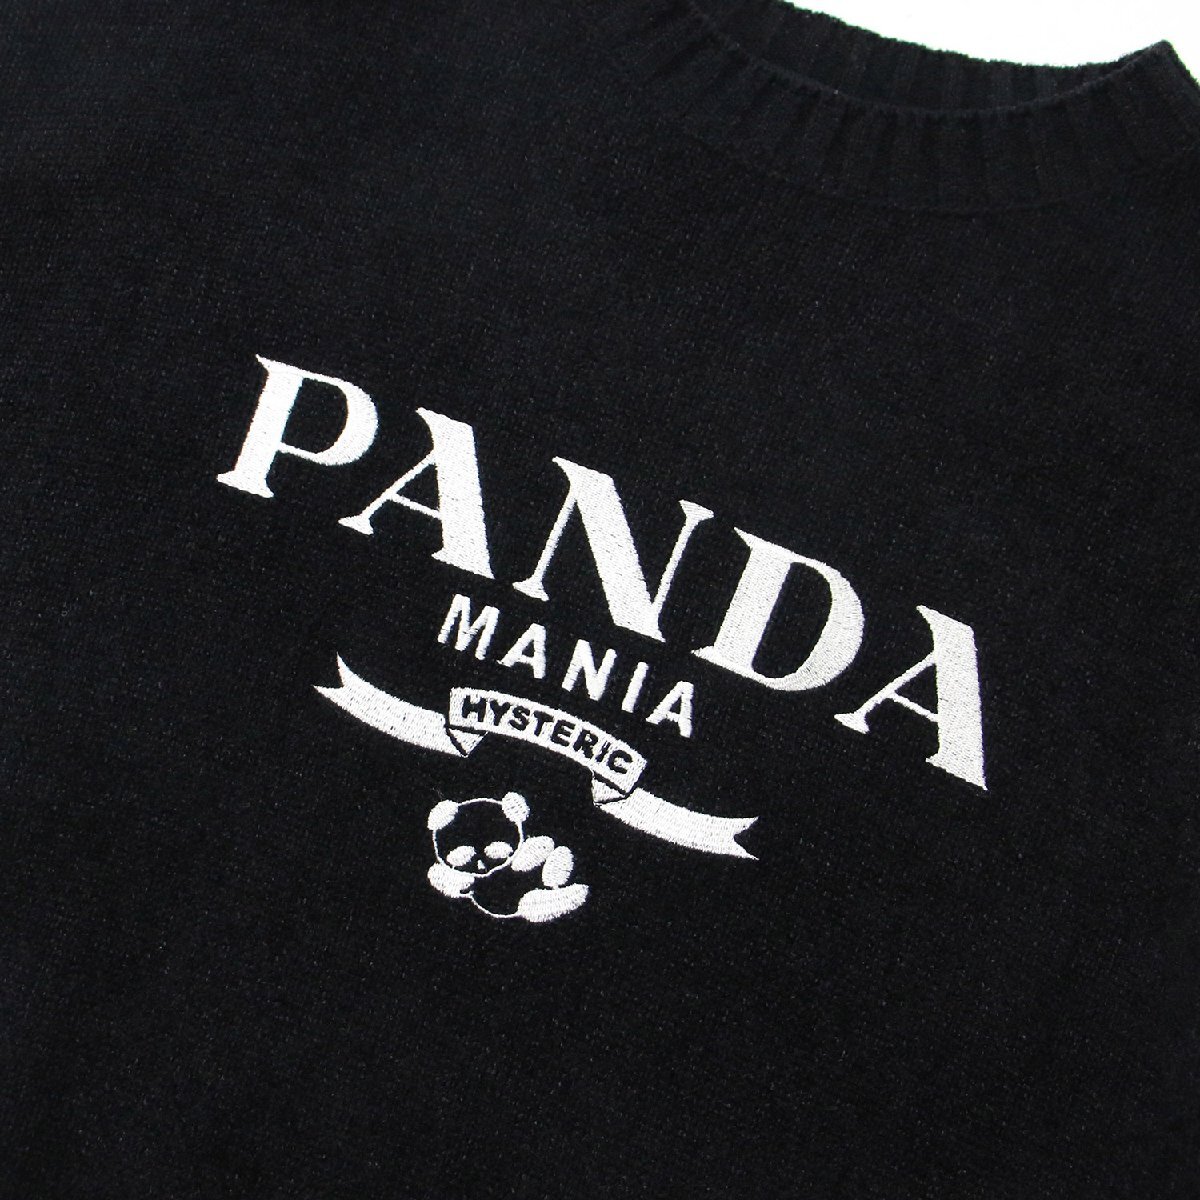 HYSTERIC GLAMOUR Hysteric Glamour knitted pull over tops black FREE long sleeve crew neck embroidery Logo Panda PANDA MANIA